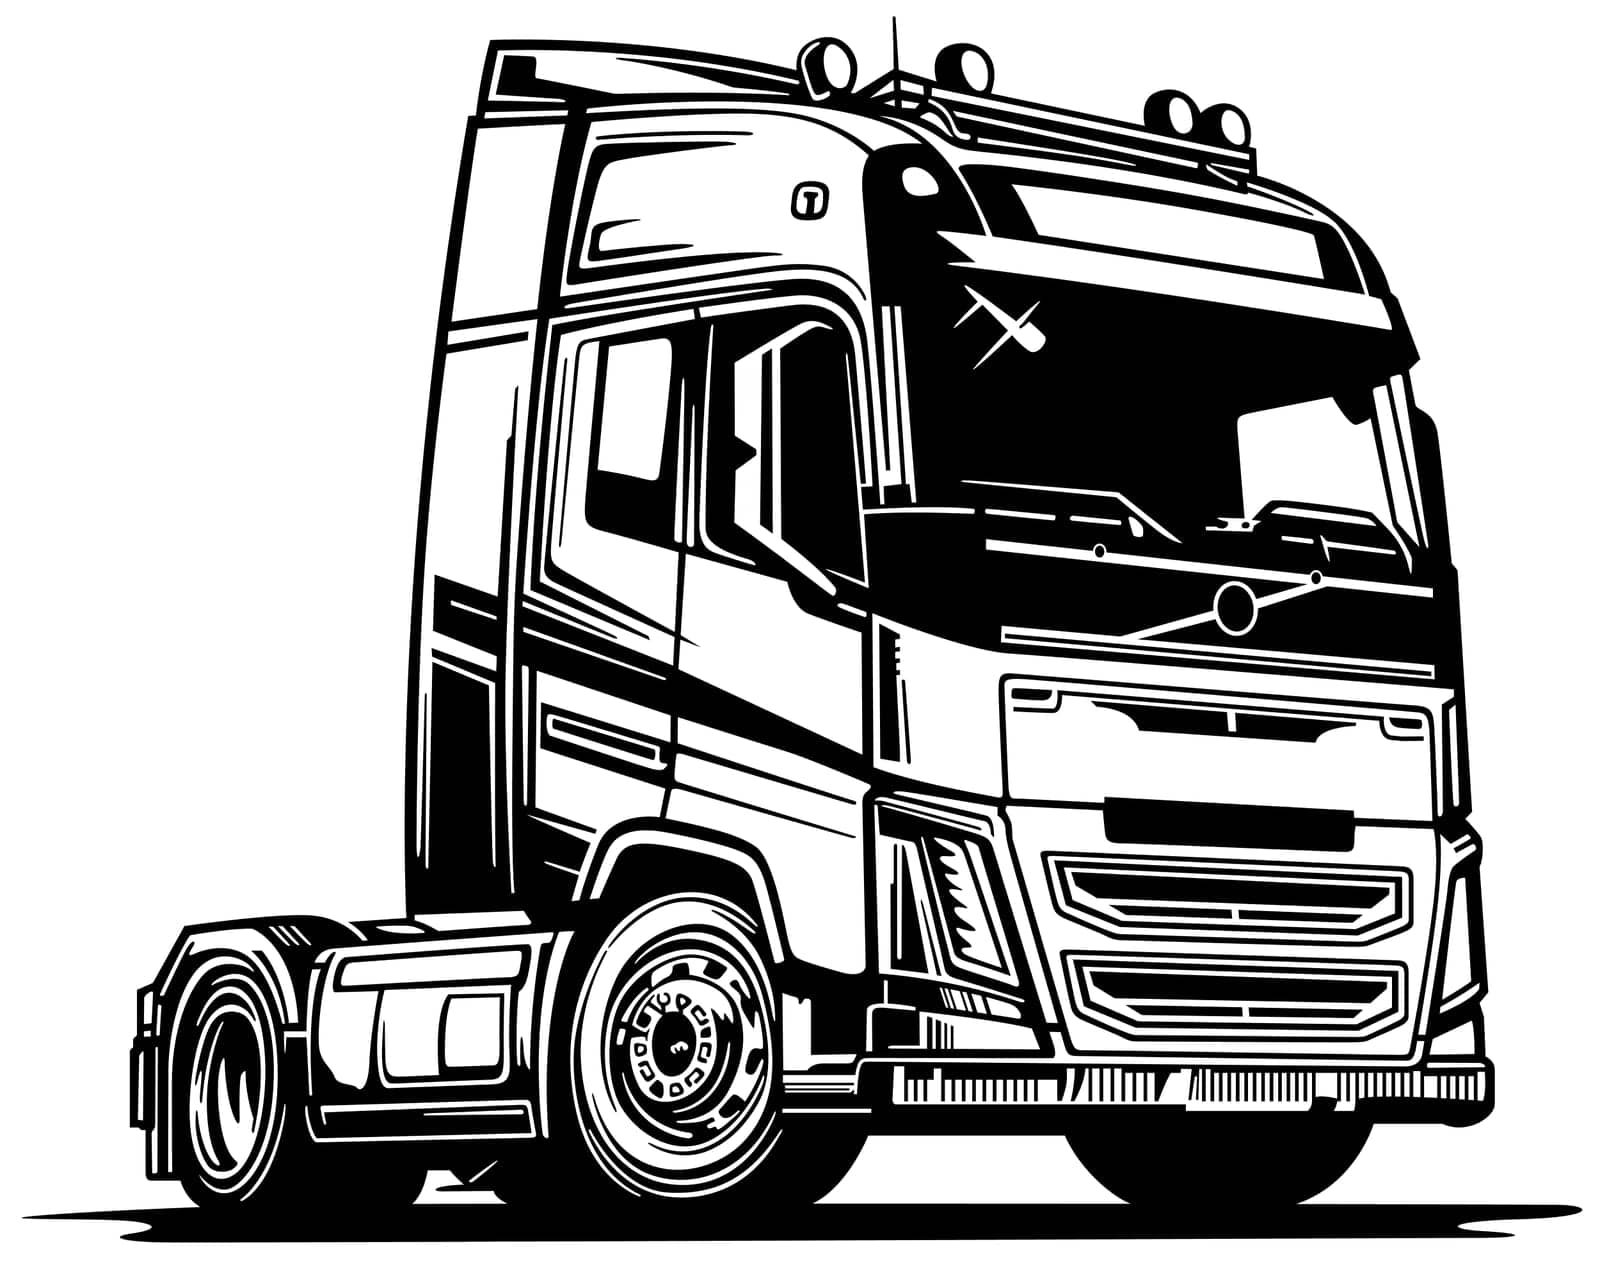 Drawing of Scandinavian Truck - Black Illustration Isolated on White Background, Vector